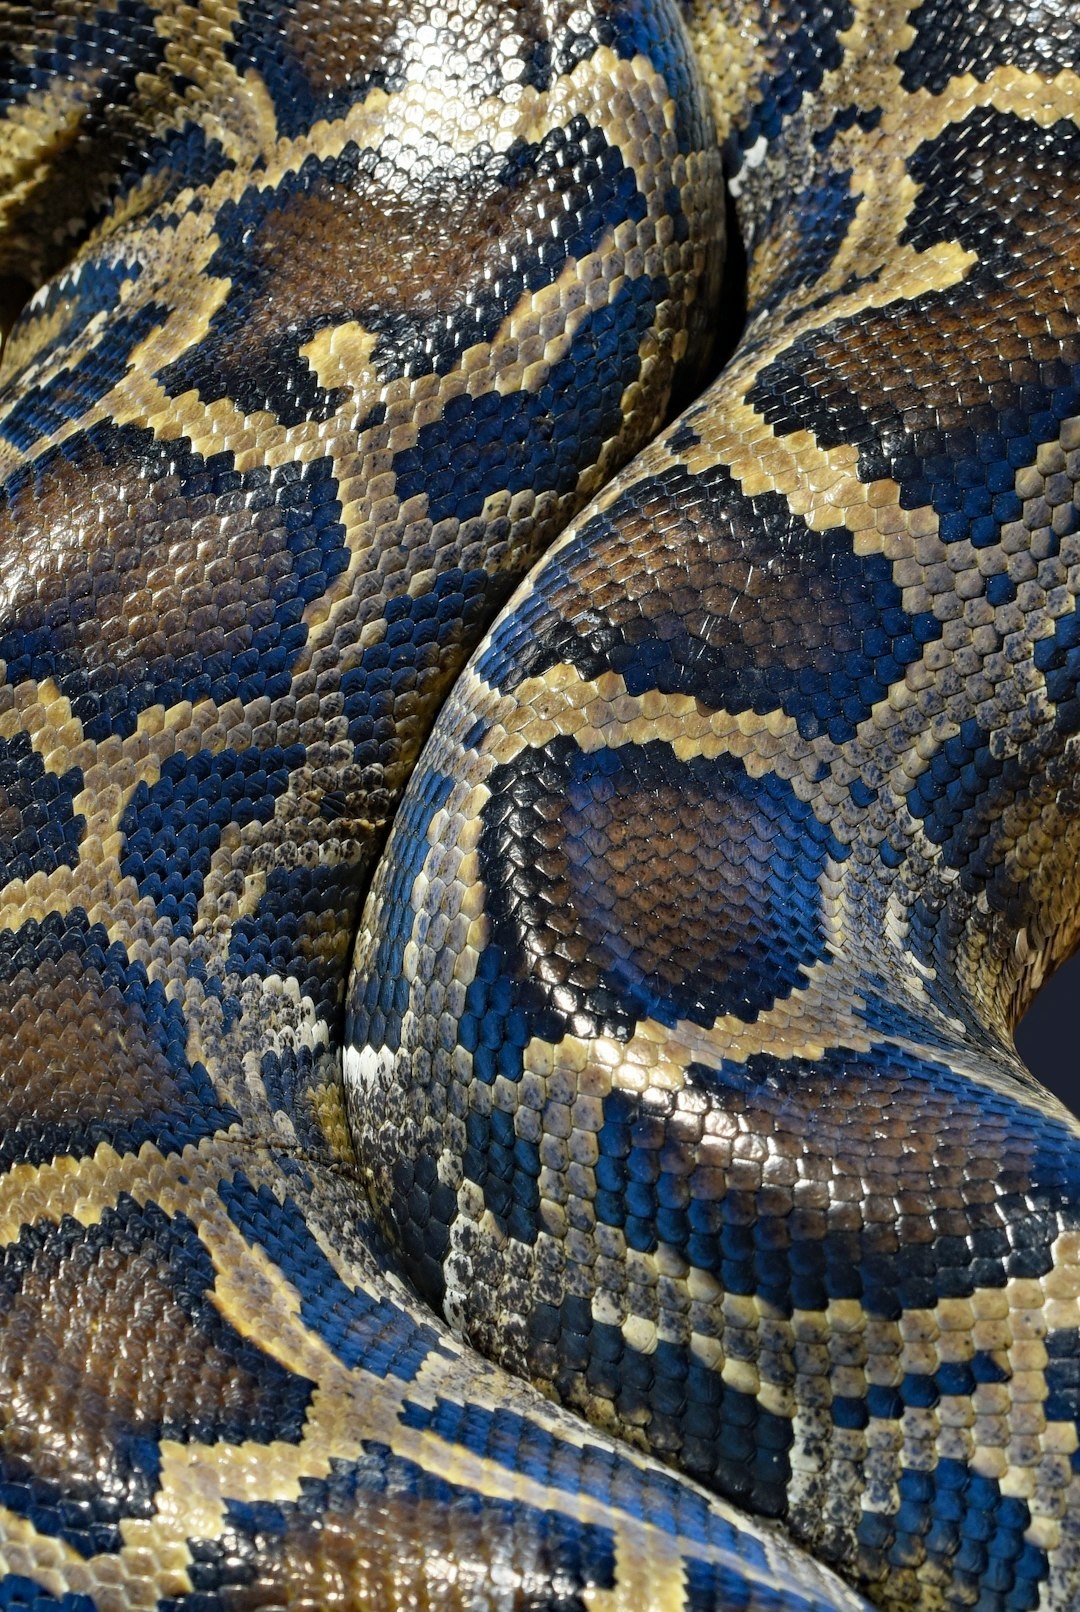 It may not be to everyone’s liking, but I think the camouflage pattern and mostly blue iridescent sheen on this Burmese python is beautiful. The camouflage is very effective in the Asian jungle lying on dead leaves and under fallen sticks and branches. Unfortunately, some of these snakes escaped captivity during hurricane Andrew, and are now a pest in the Florida Everglades.